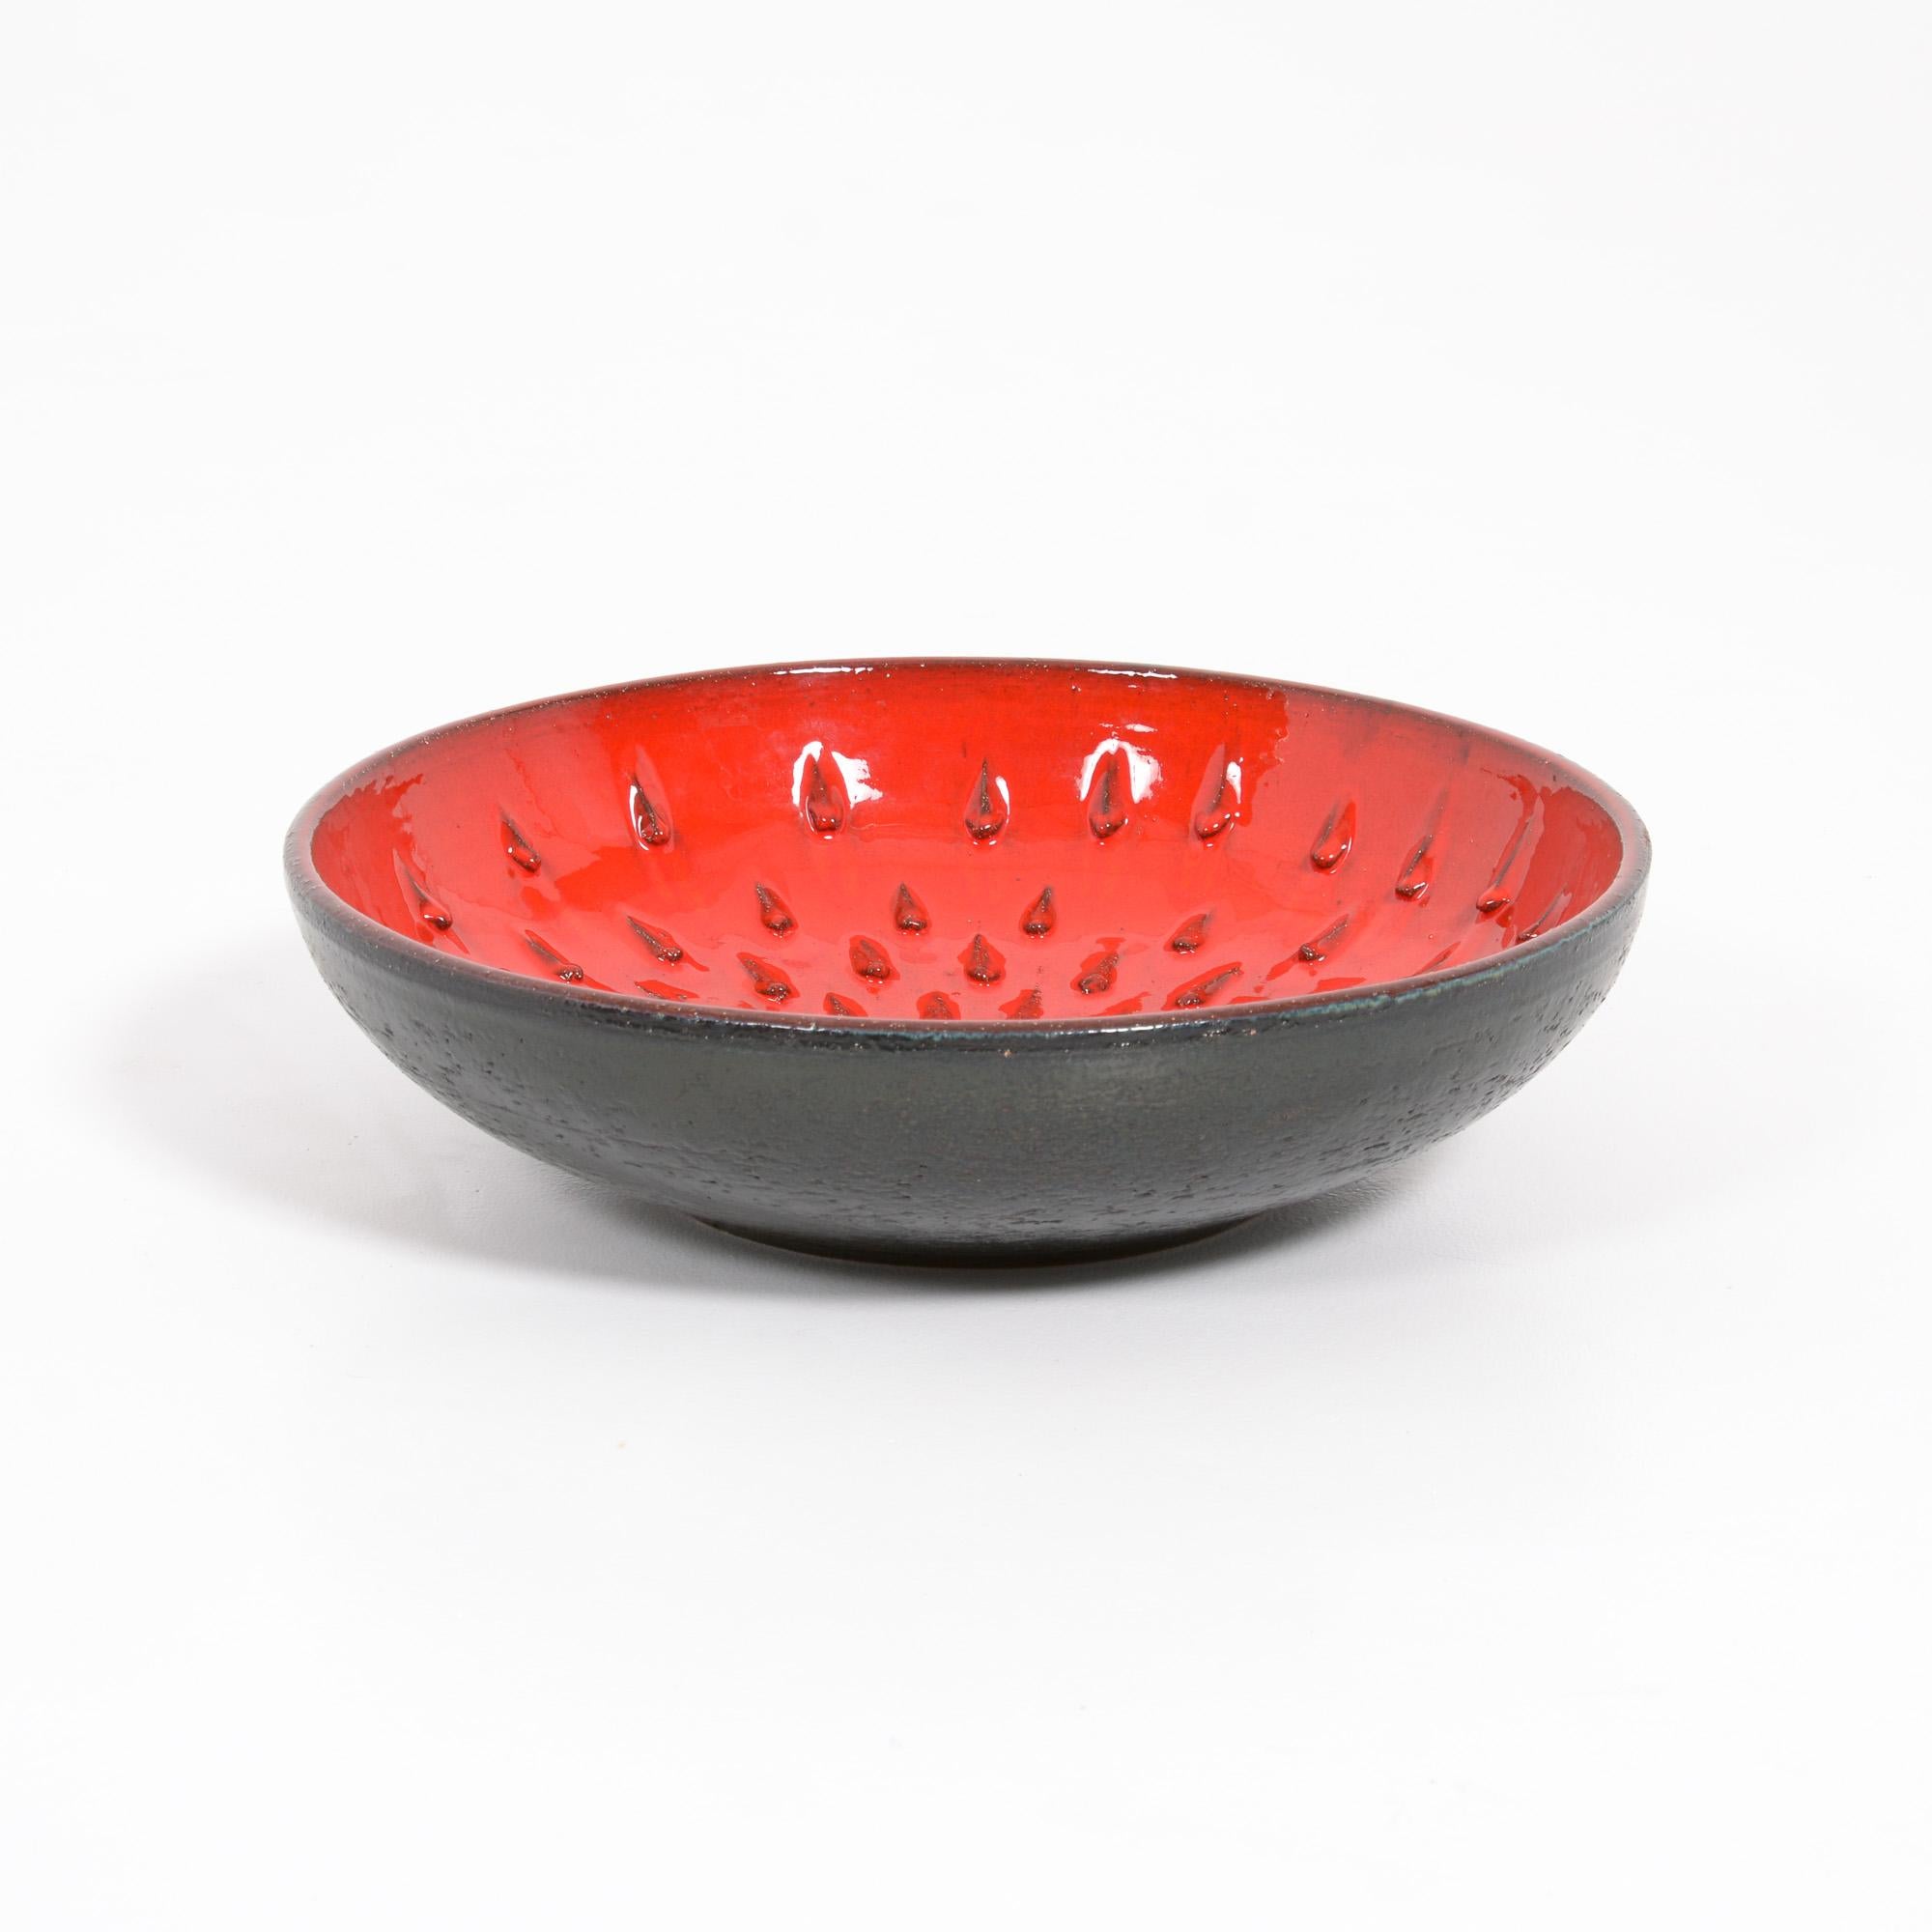 This beautiful red bowl was created by Rogier Vandeweghe in his workshop Amphora. It can be dated in the 1960s.
The inside is decorated and finished with the amazing red glaze. The outside of the bowl has a rough texture, black glazed.
The bowl is